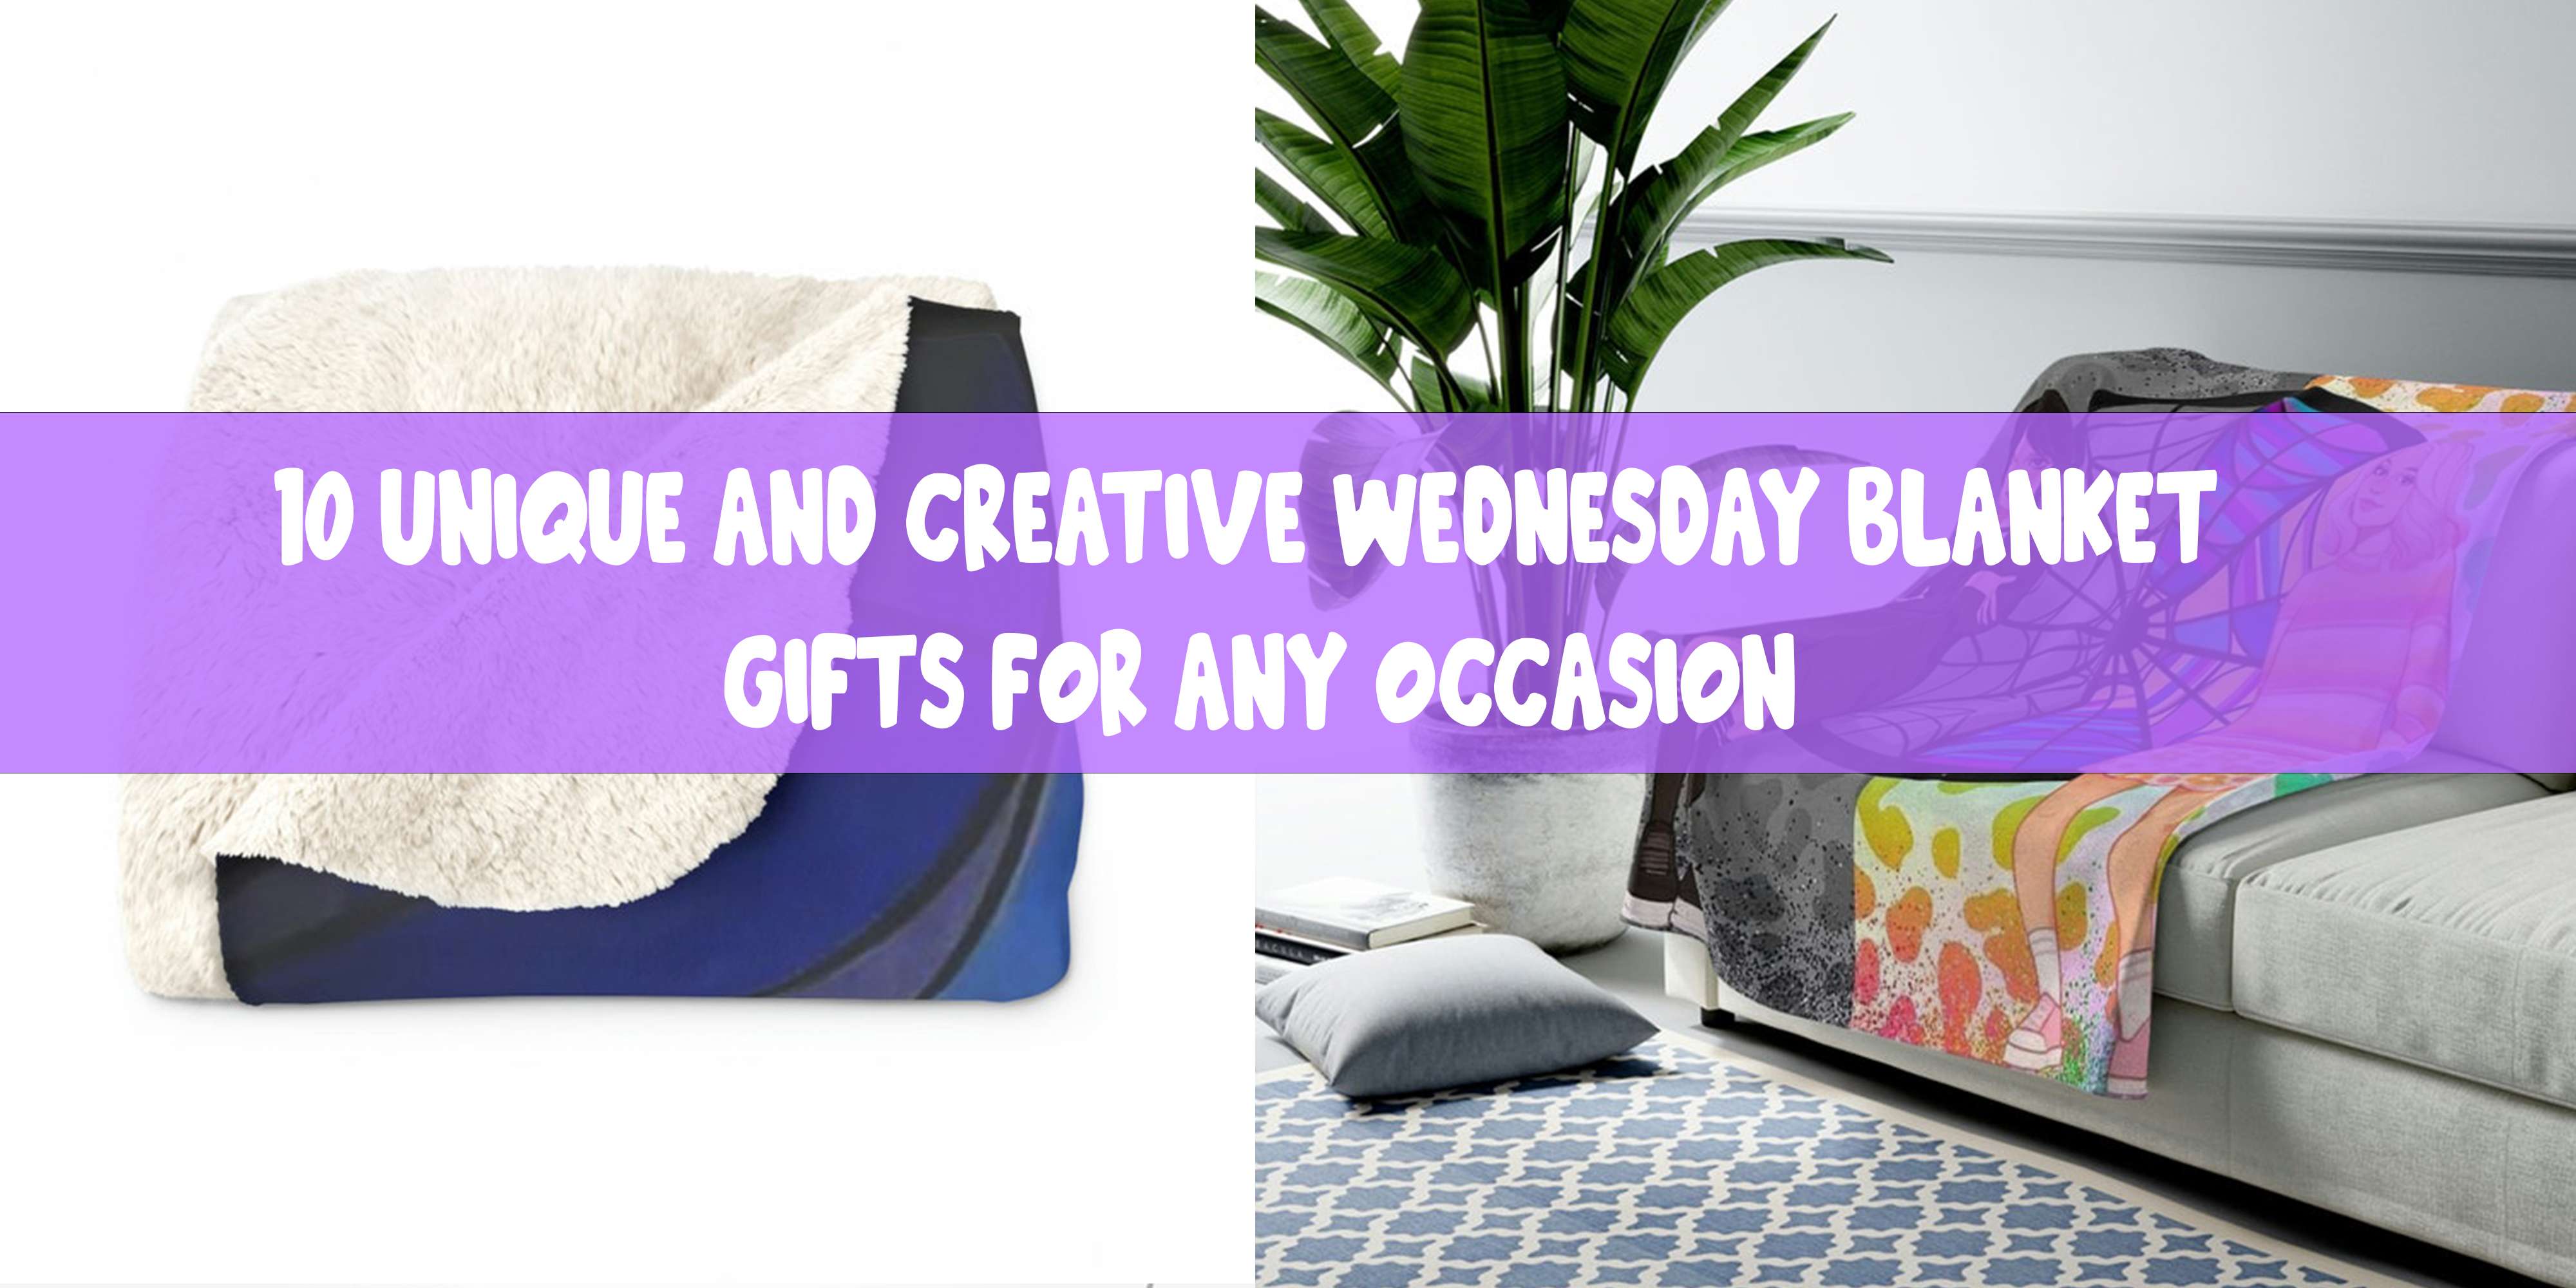 10 Unique and Creative Wednesday Blanket Gifts for Any Occasion